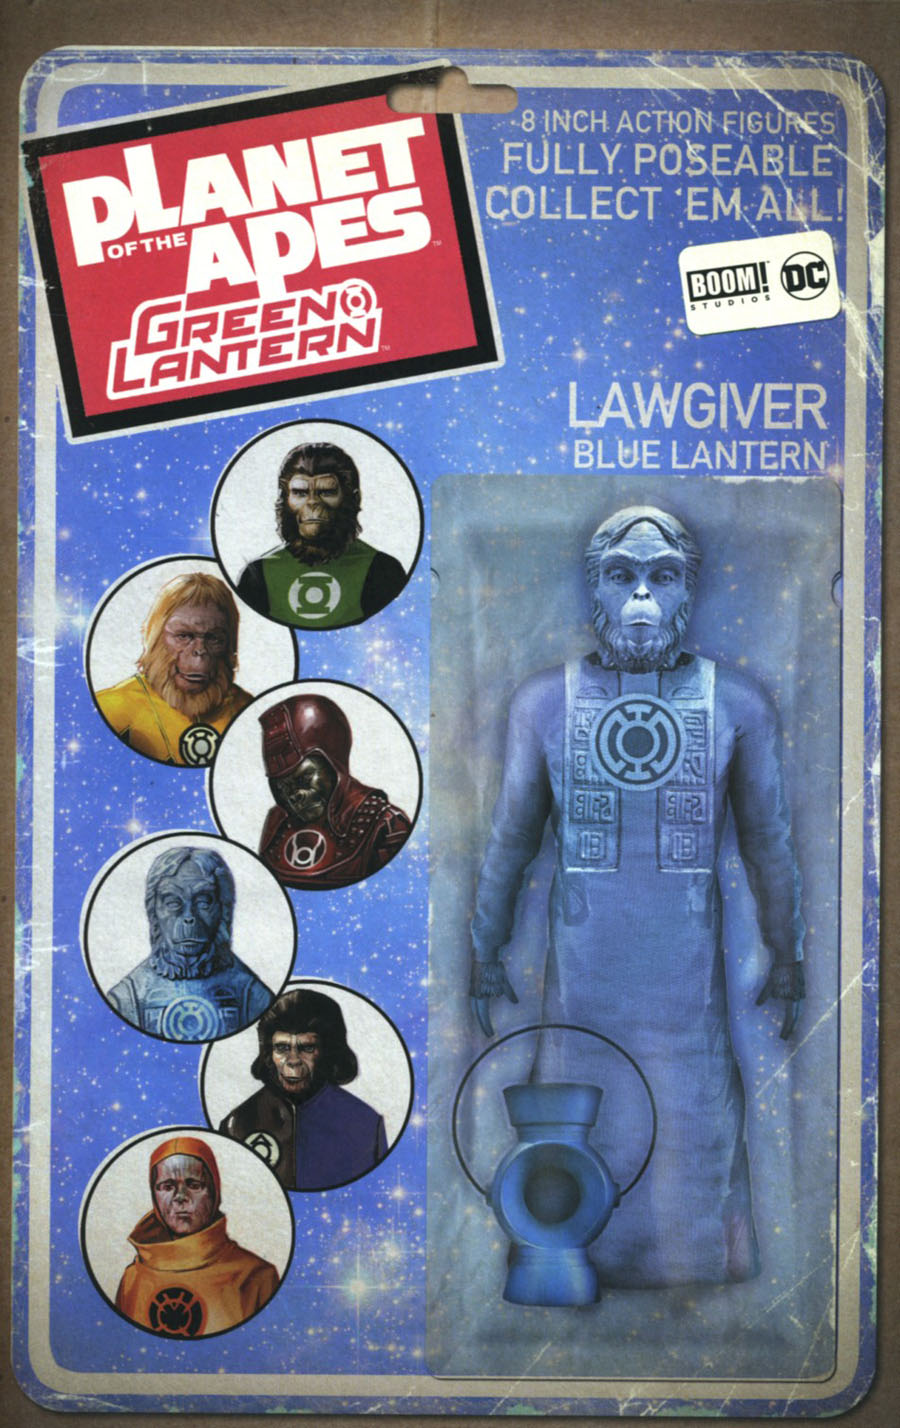 Planet Of The Apes Green Lantern #4 Cover B Variant David Ryan Robinson Vintage Action Figure Cover